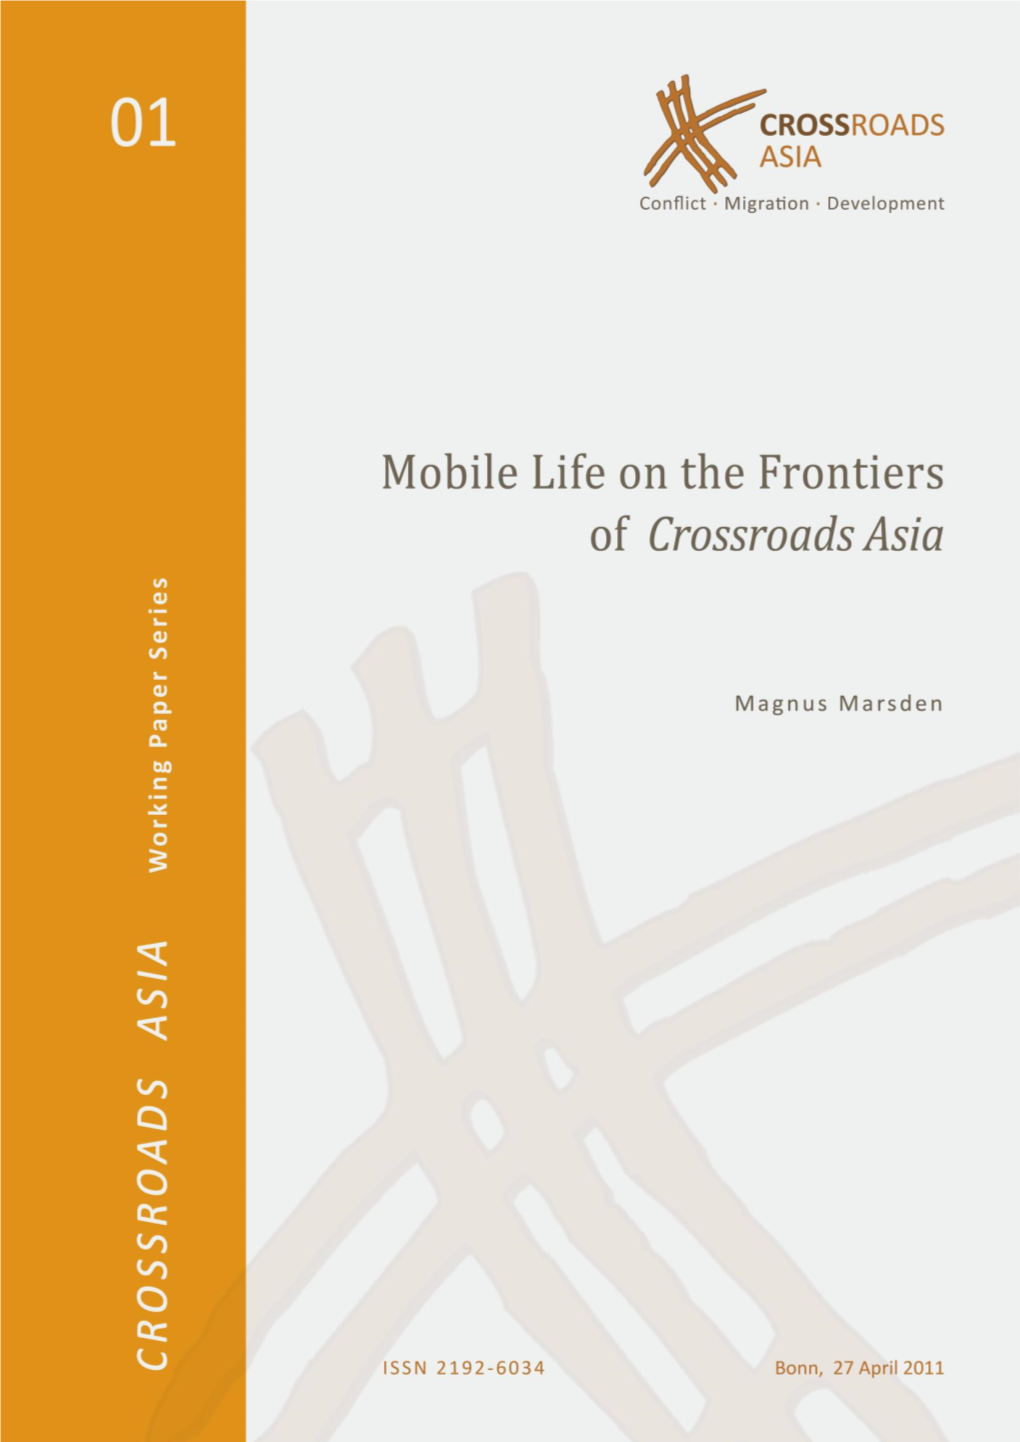 Mobile Life on the Frontiers of Crossroads Asia